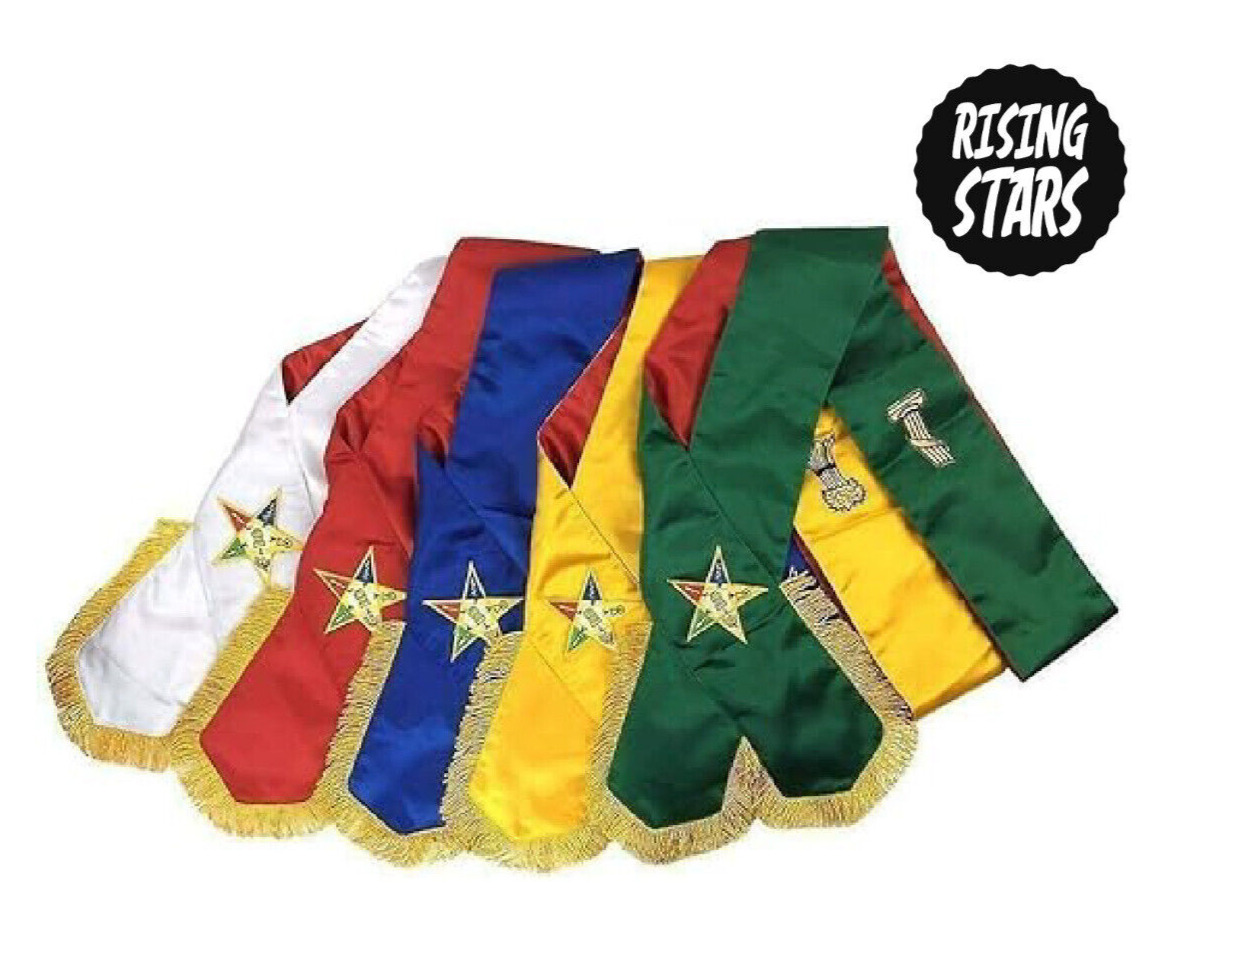 Masonic Order of Eastern Star OES complete Set of 5 sashes